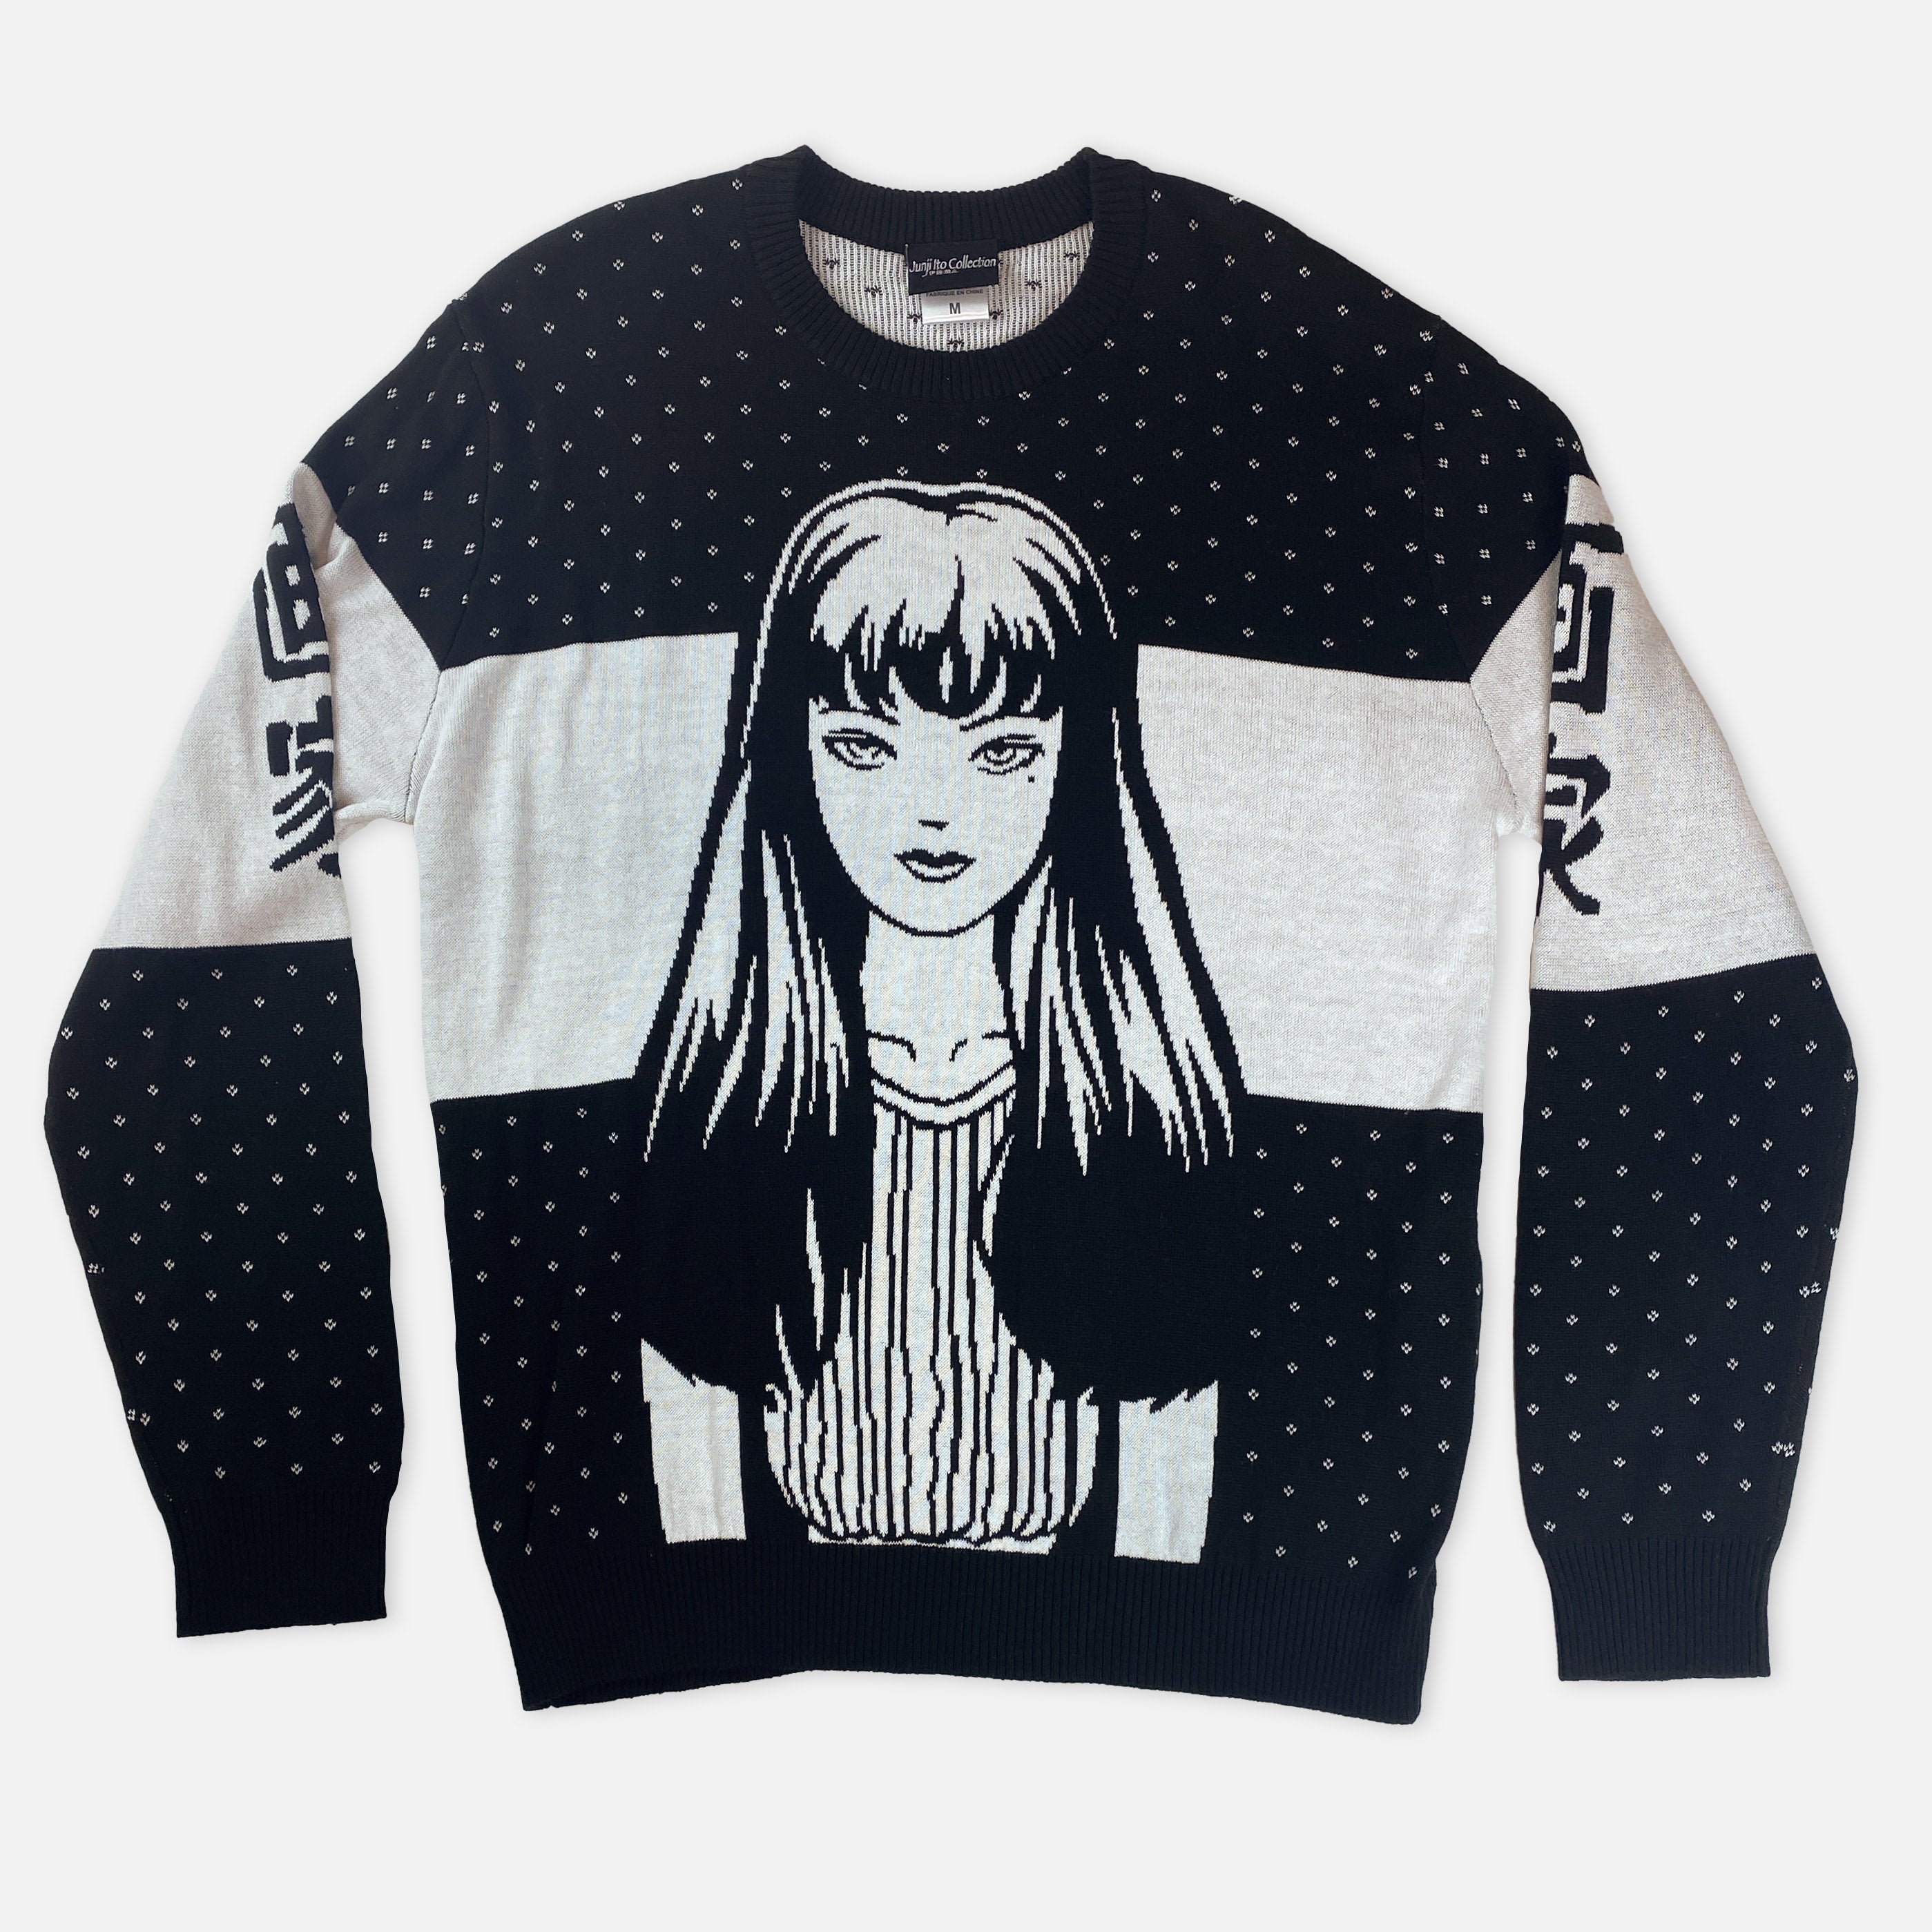 Junji Ito - Tomie Holiday Sweater - Crunchyroll Exclusive! image count 0